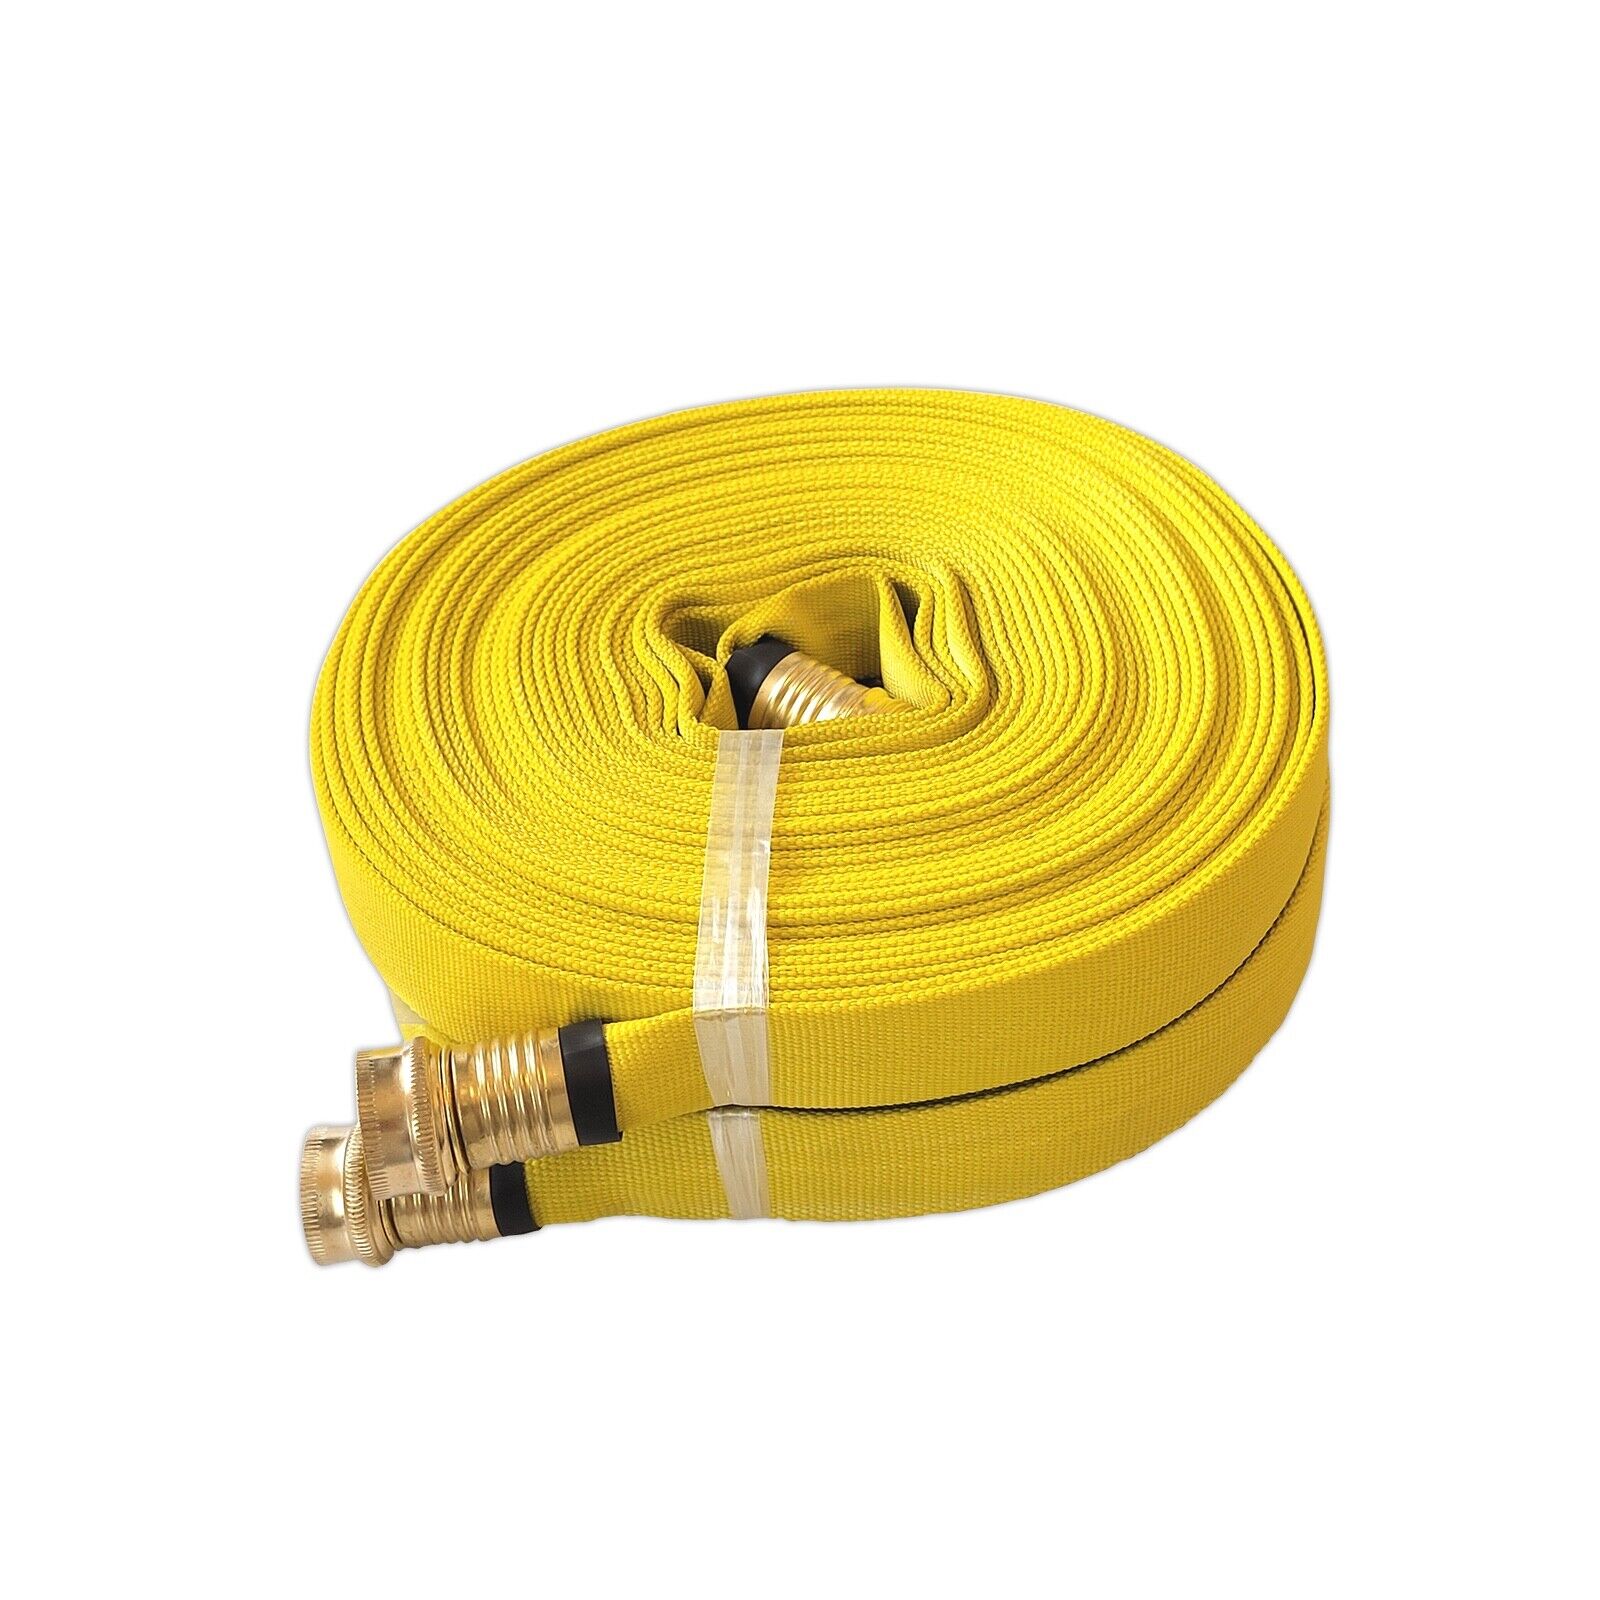 Pack of-2 Forestry Grade Lay Flat Fire Hose w/Garden Thread 3/4in.x50 ft. YELLOW